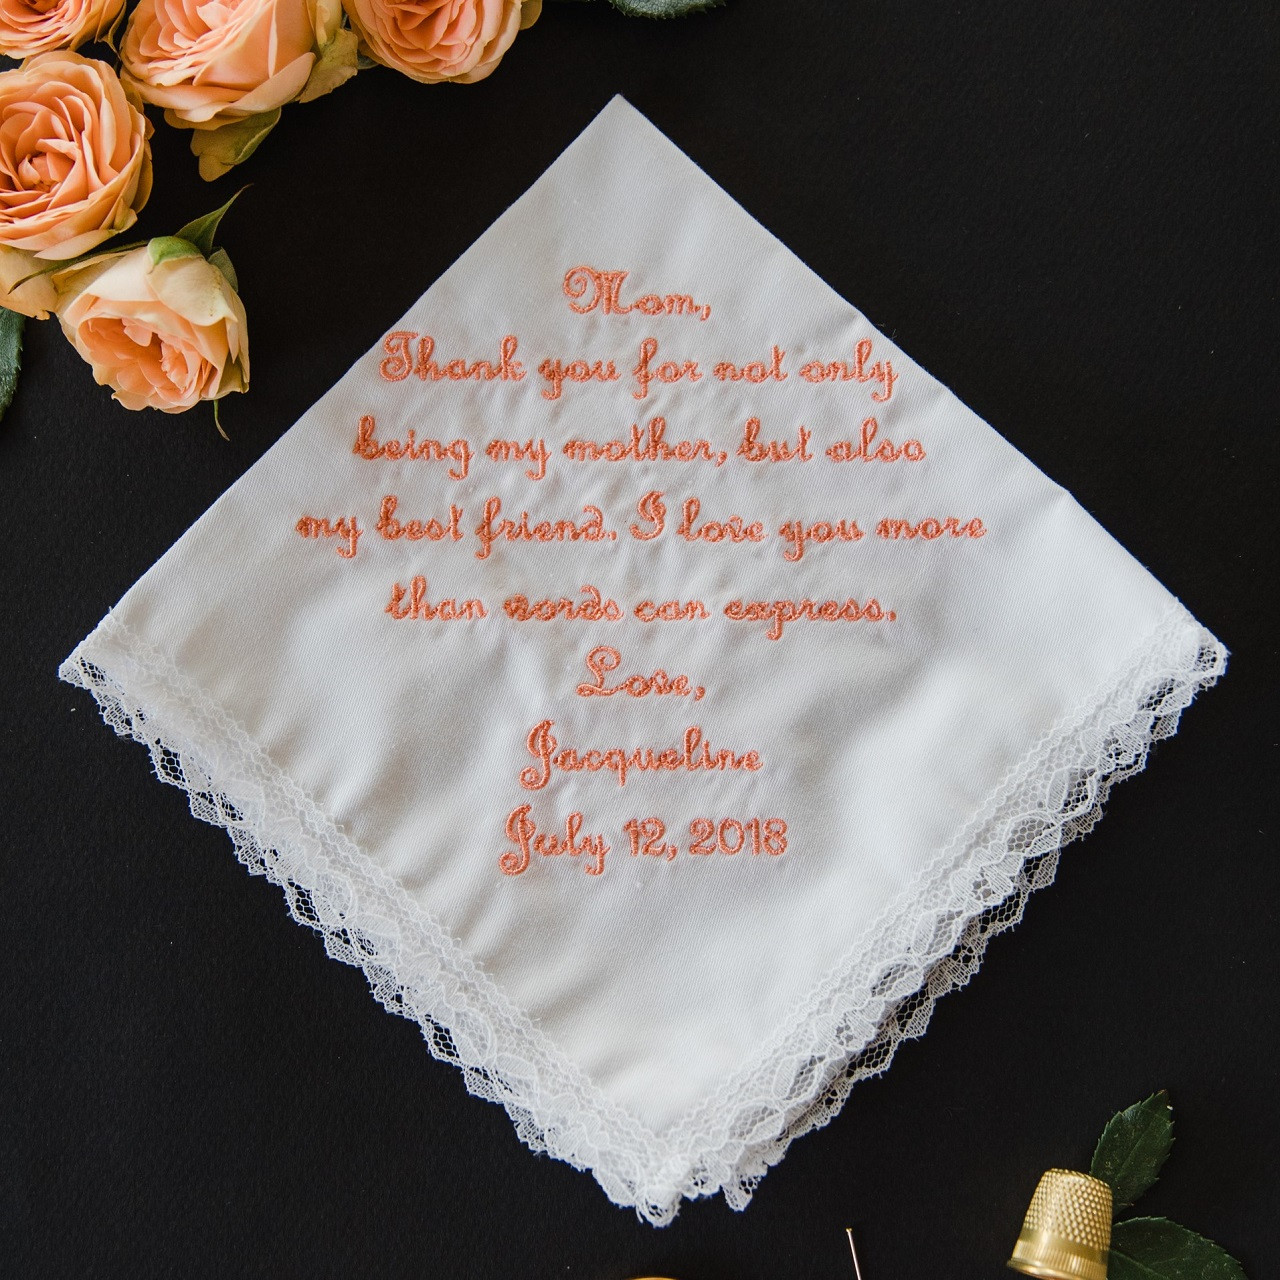 100% COTTON ANY WORDING EMBROIDERED PERSONALISED WEDDING HANDKERCHIEF POEMS 